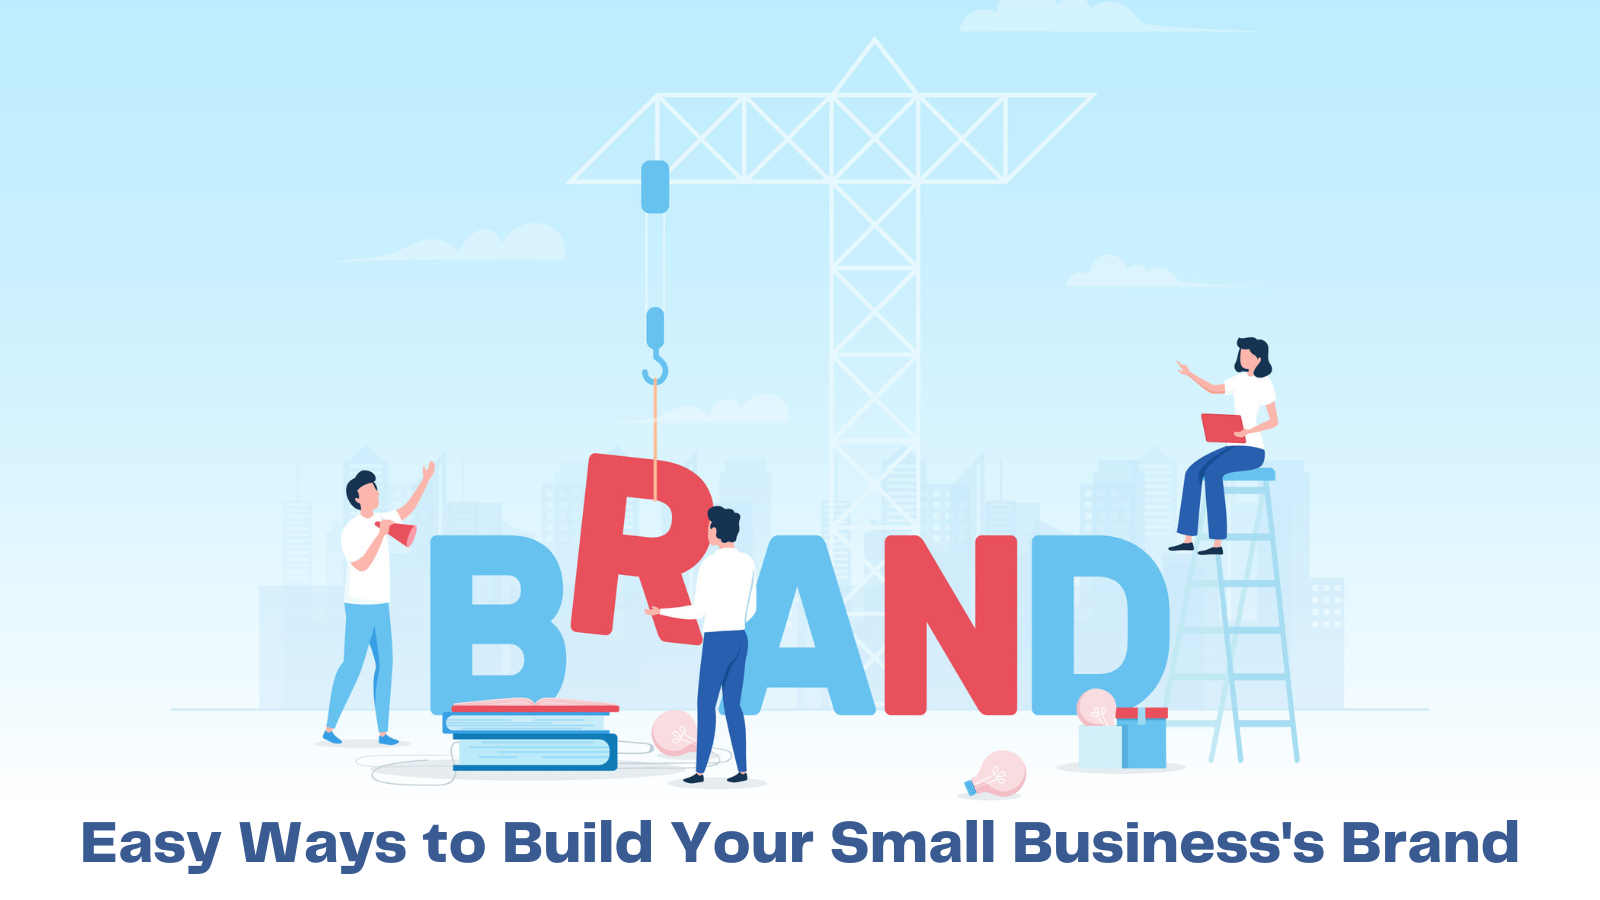 Easy Ways to Build Your Small Business's Brand